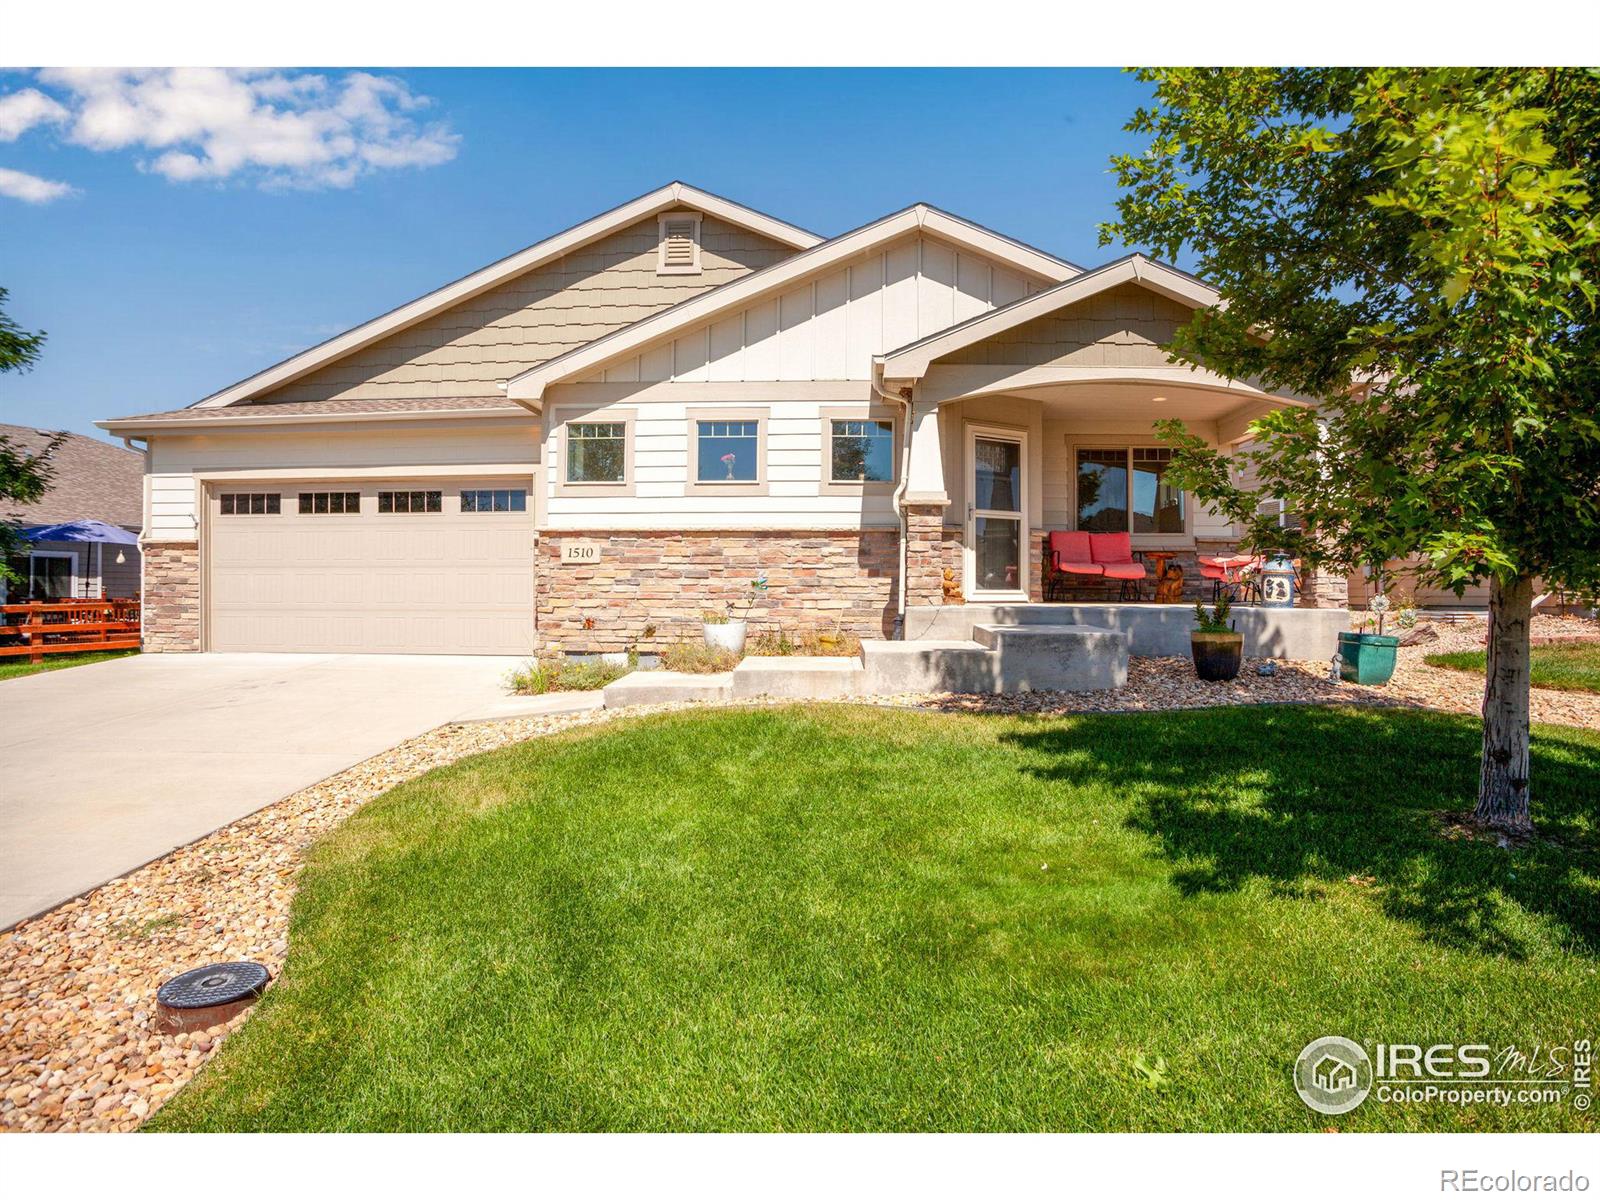 1510  63rd Ave Ct, greeley MLS: 456789995492 Beds: 3 Baths: 2 Price: $500,000